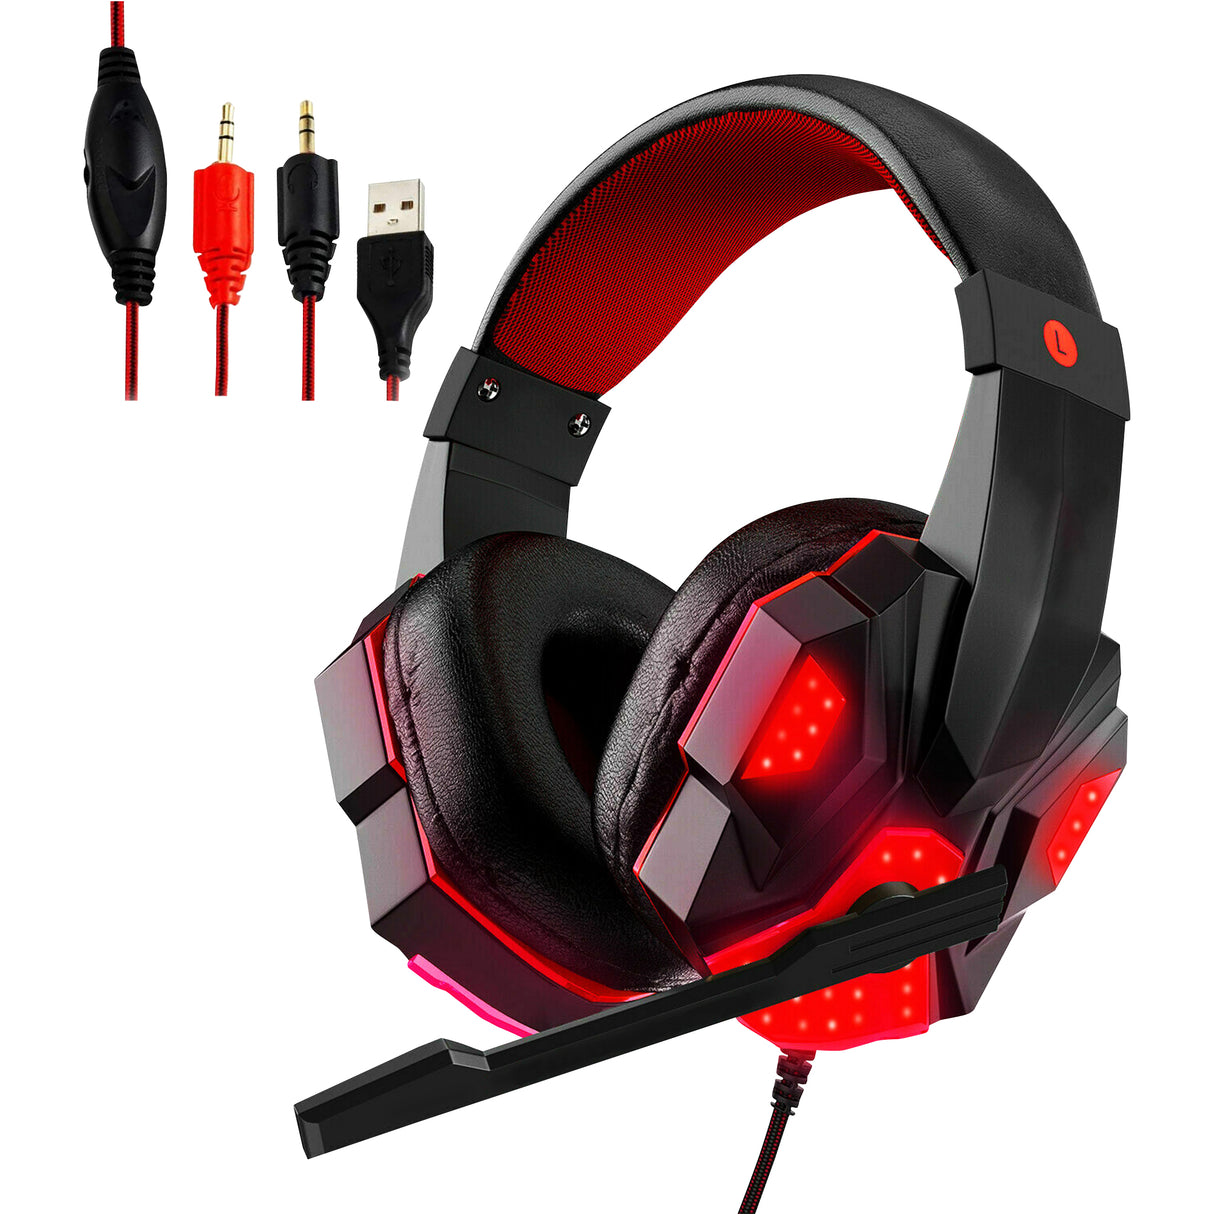 5 CORE Gaming Headset for PS4 PC One PS5 Console Controller, Noise Cancelling Microphone Over Ear Stereo Headphones with Mic, LED Light, Bass Surround, Earmuffs for Laptop Mac NES Games HDP GM1 R